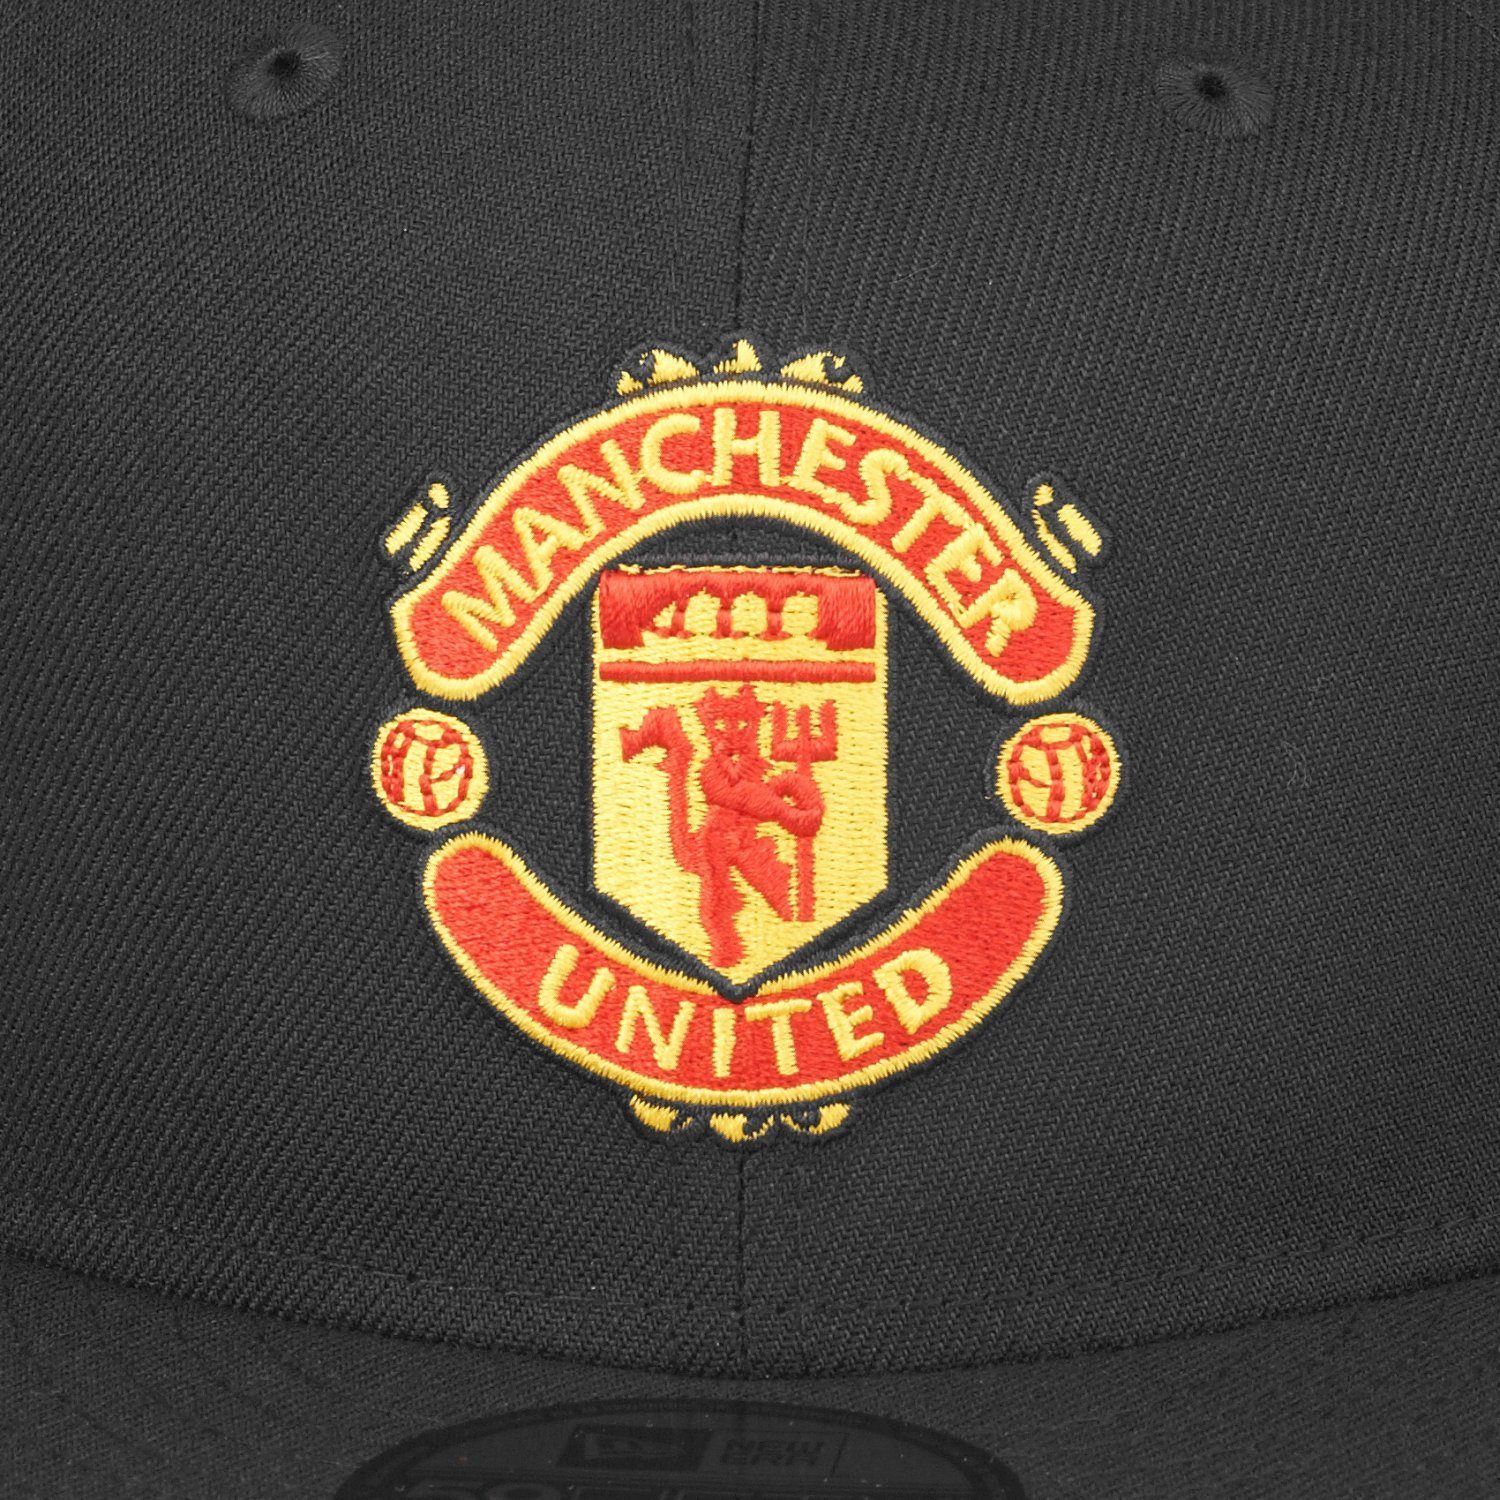 United 59Fifty Cap New MUFC Manchester Fitted Era